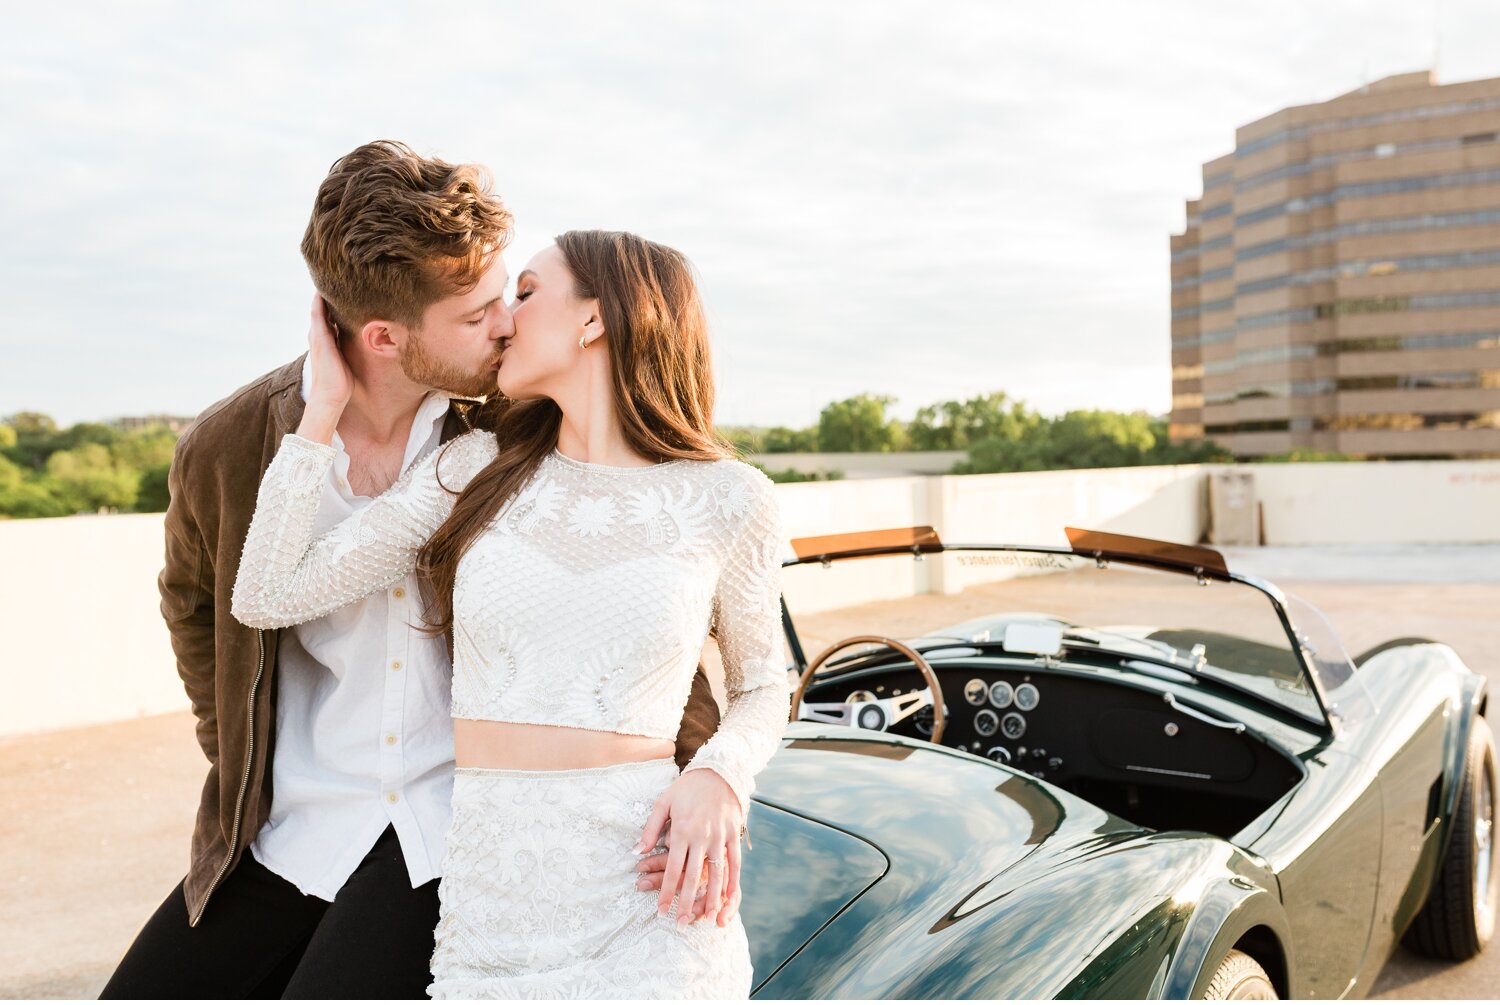 London + Christian Downtown Austin Rooftop Classic Car Engagement Session_0045.jpg